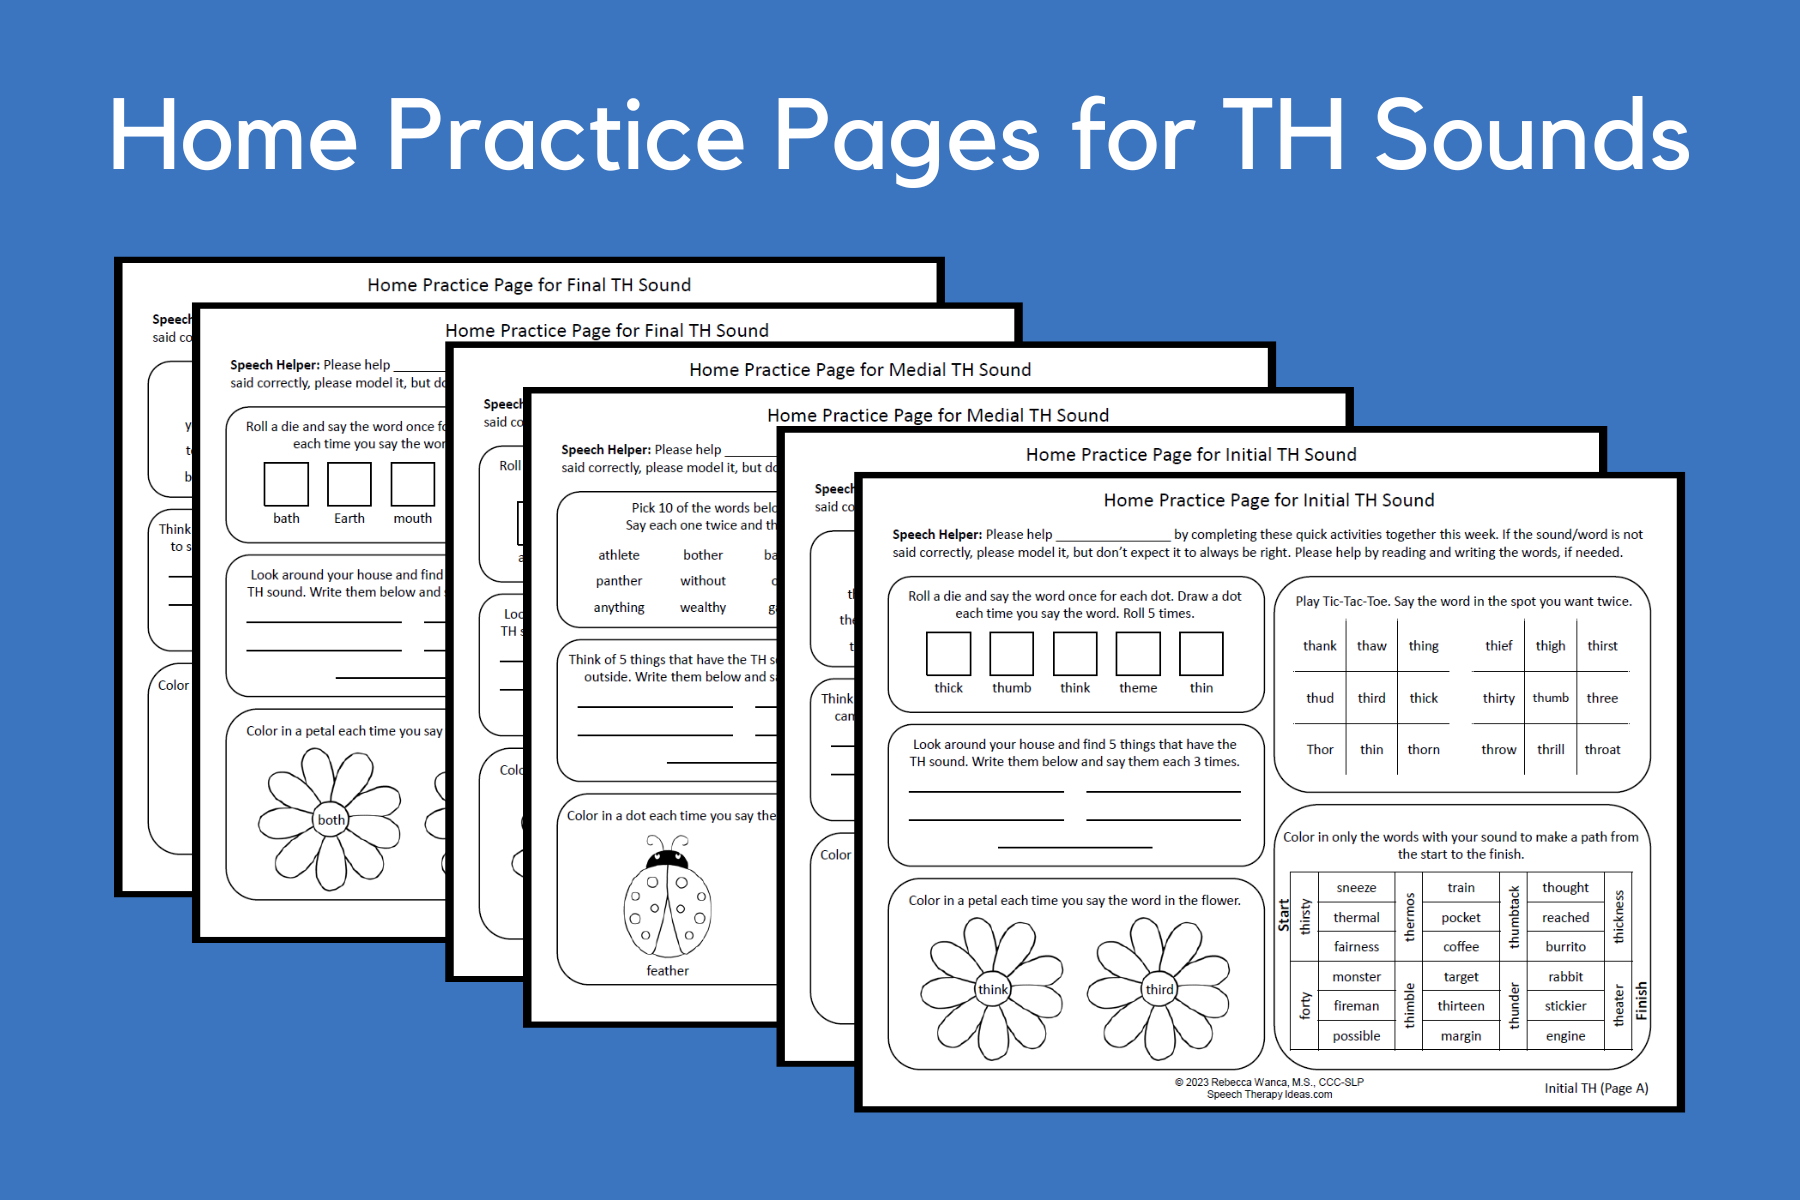 Home Practice Pages for TH Sounds